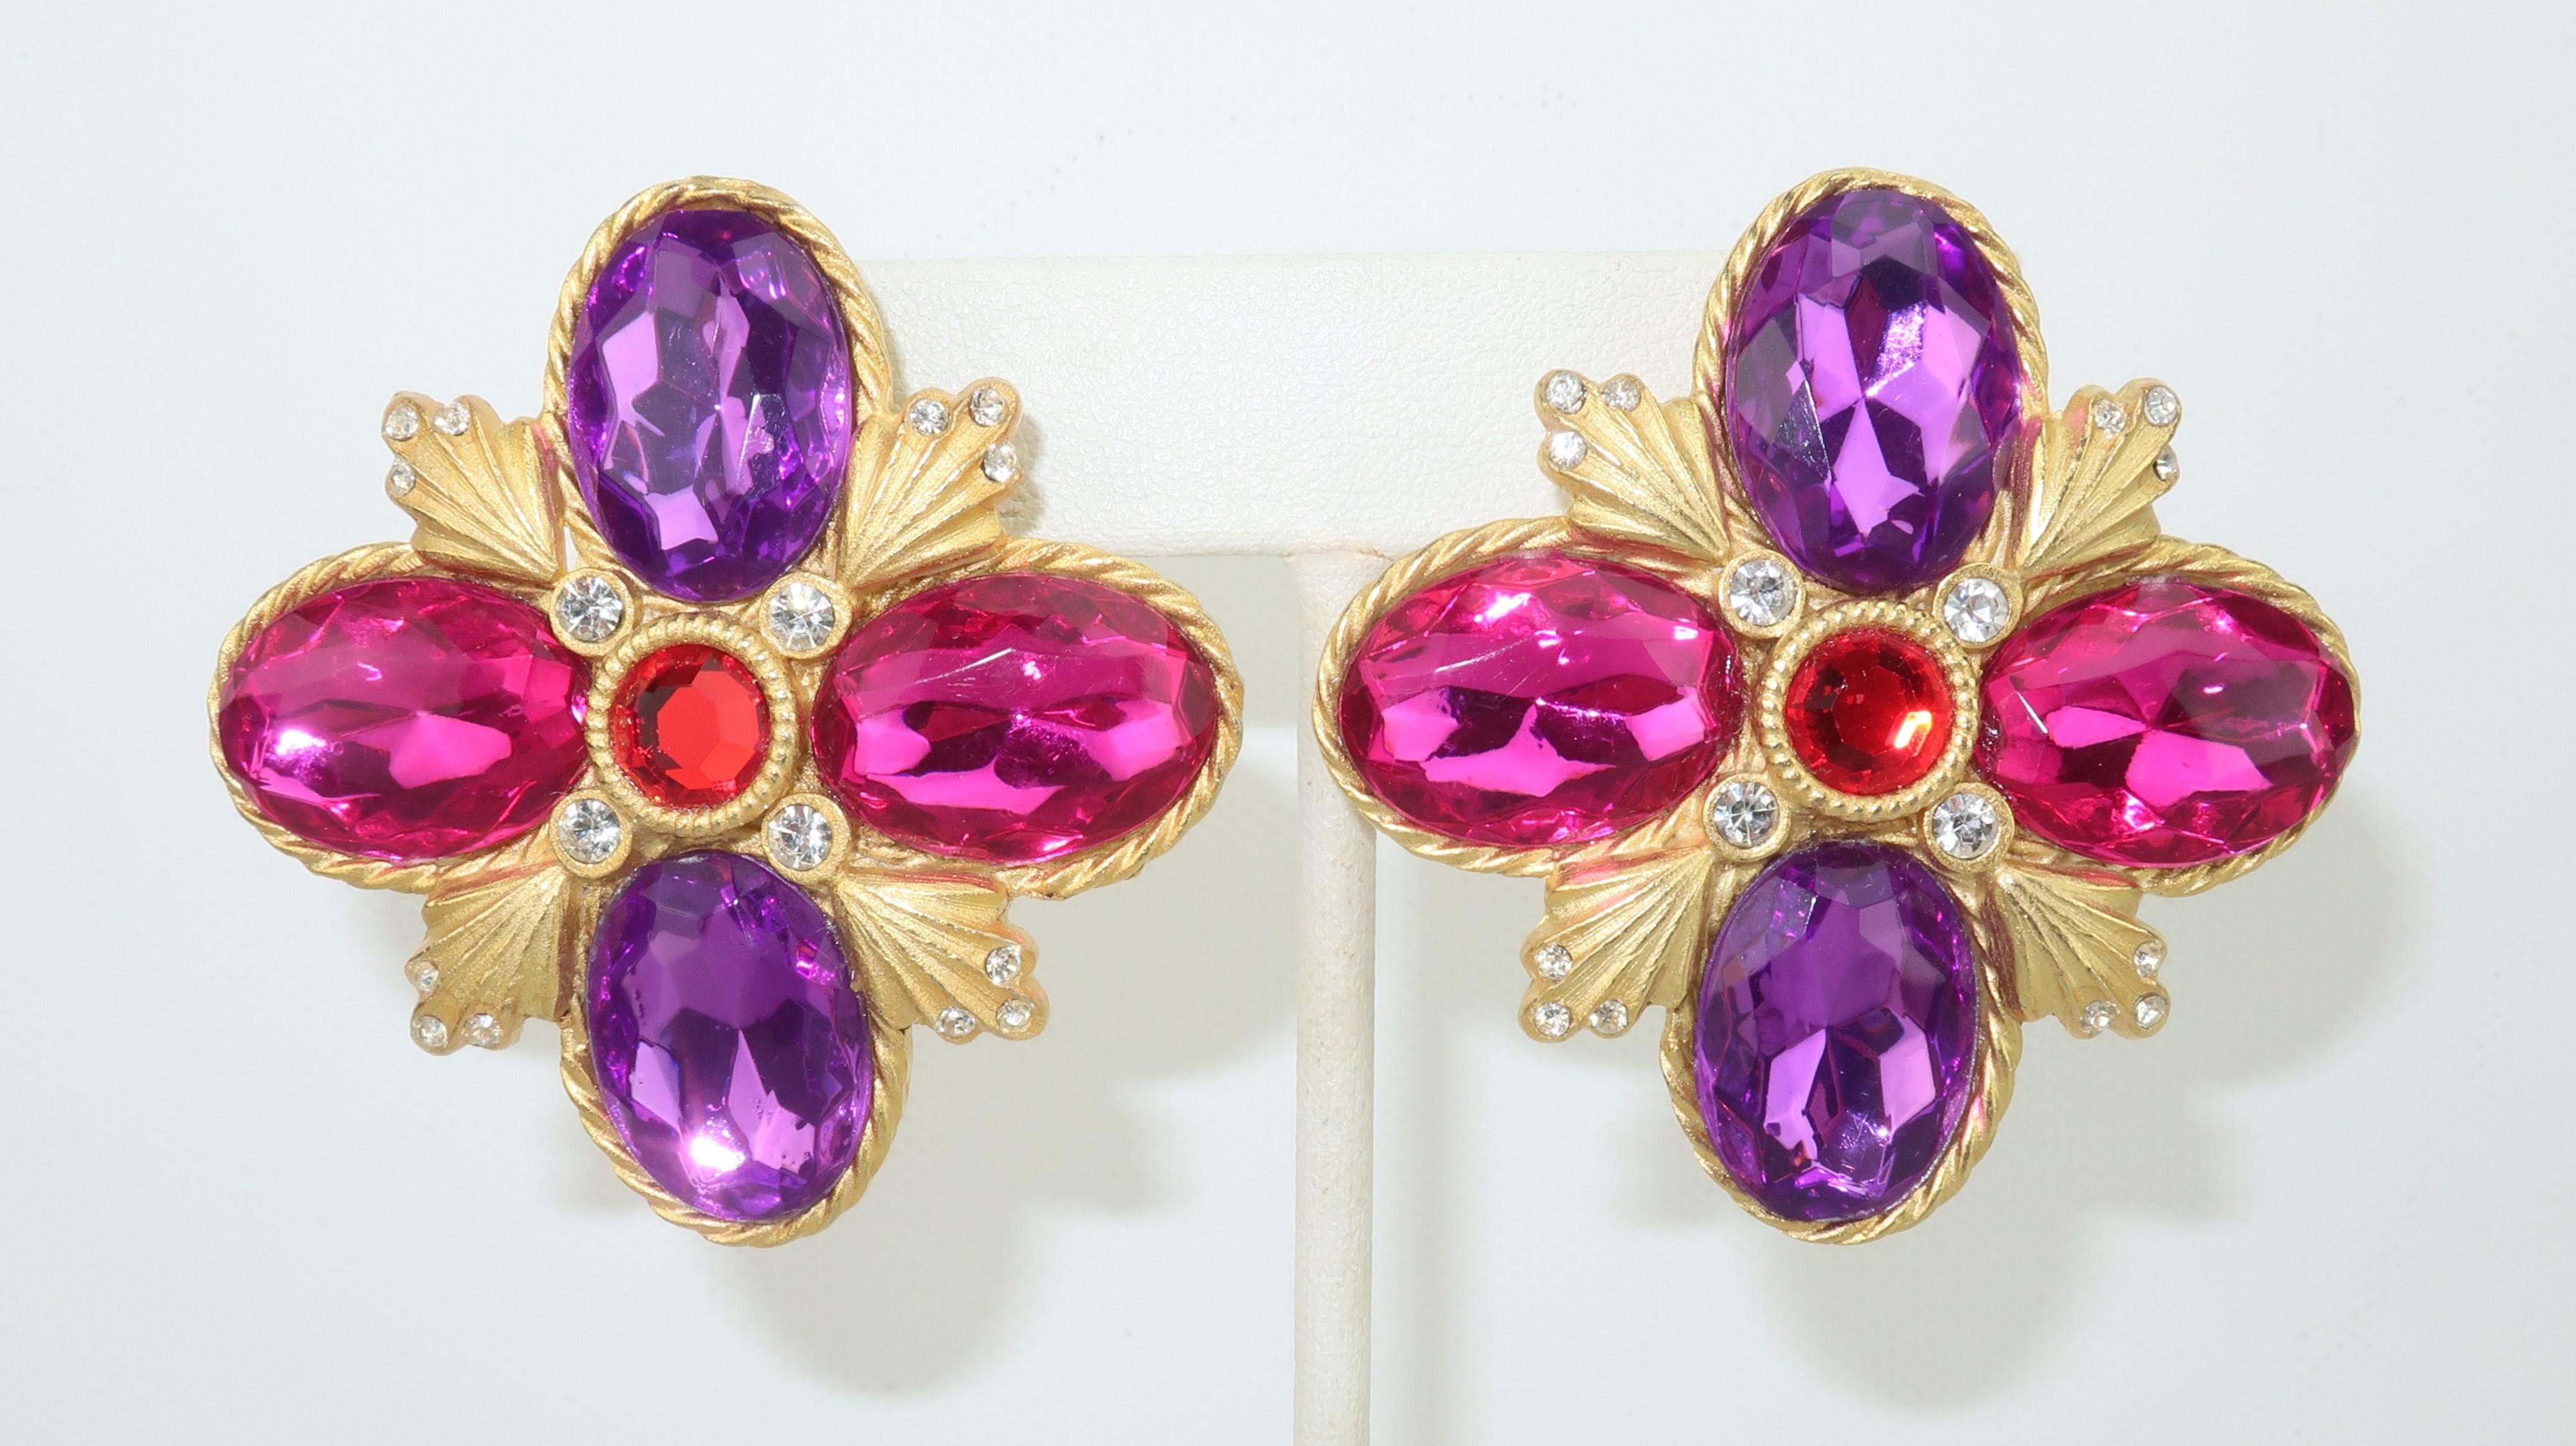 Large statement making clip on earrings by Gerard Yosca with a color rich 1980's opulence.  The earrings have a Maltese cross style silhouette in a brushed gold tone setting embellished with crystal rhinestones and faceted resin stones in shades of